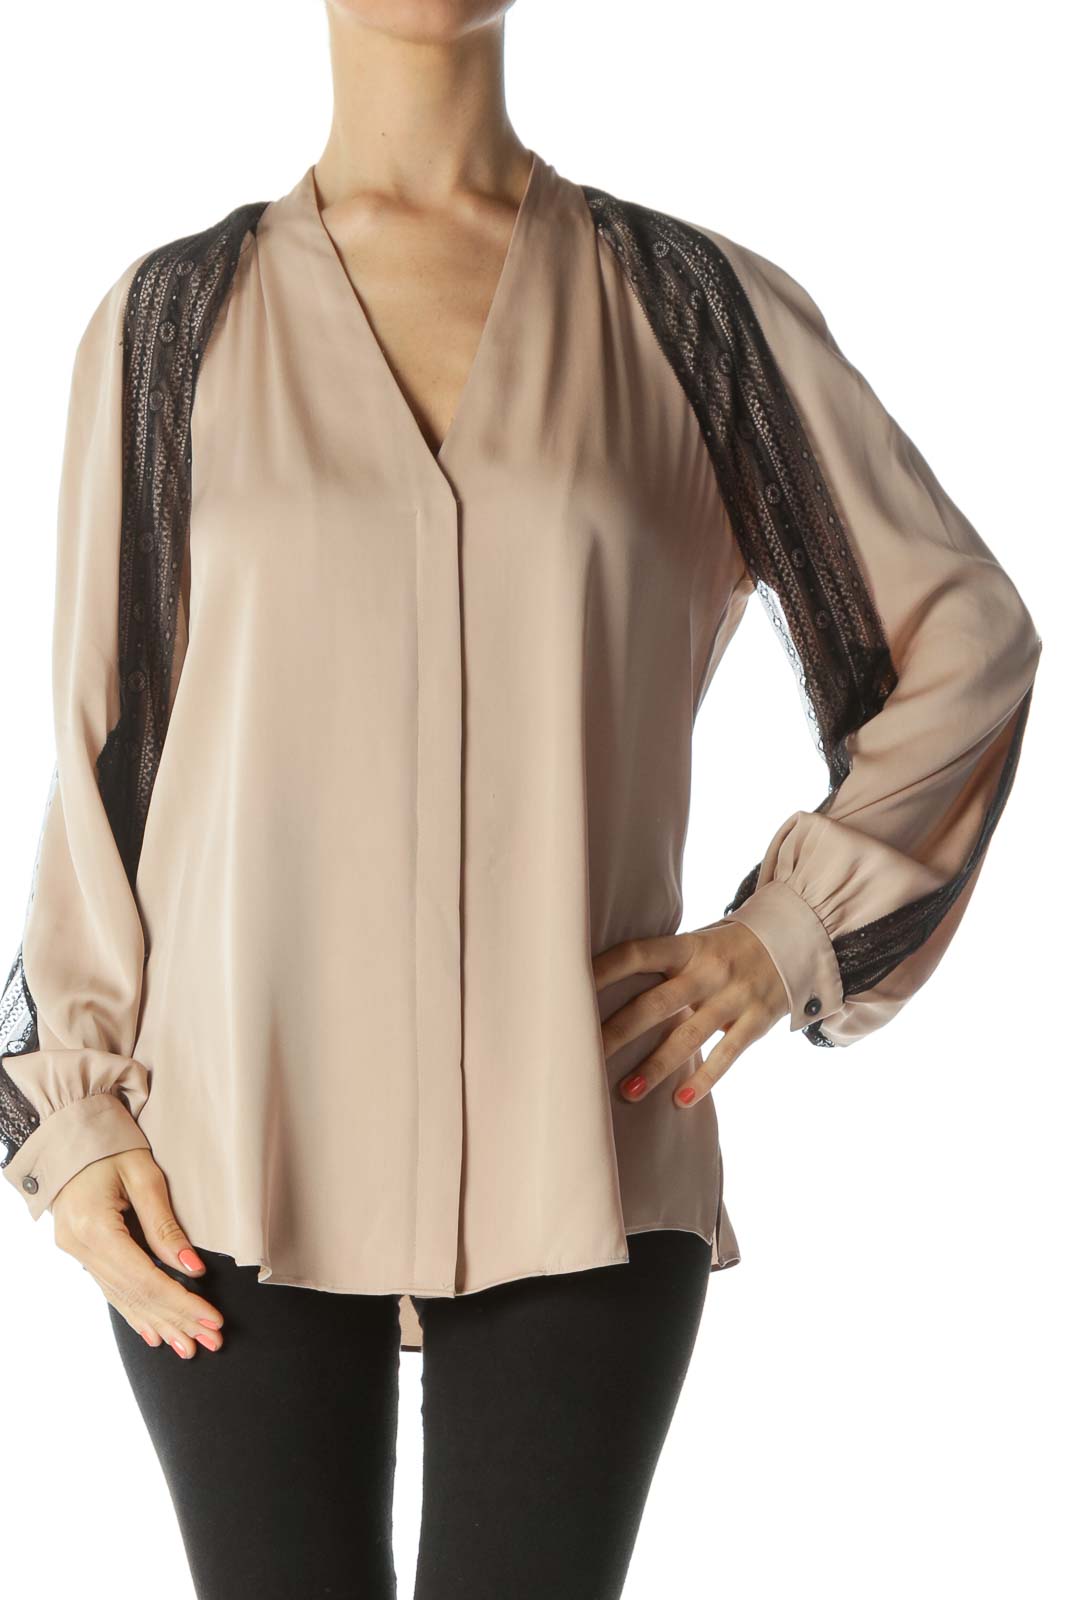 Beige Silk Black-Lace-Sleeved Long-Sleeve Blouse Front